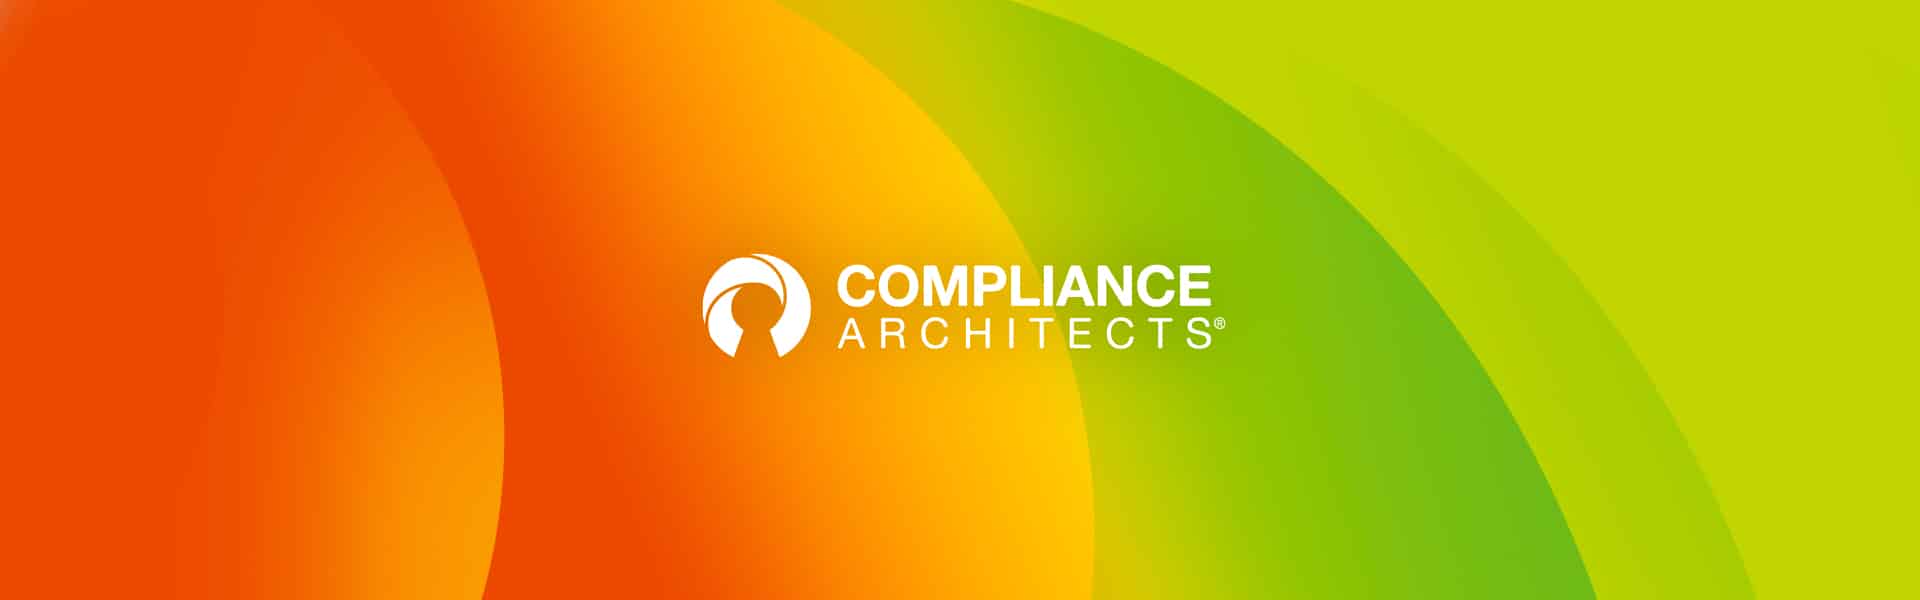 Compliance Architects